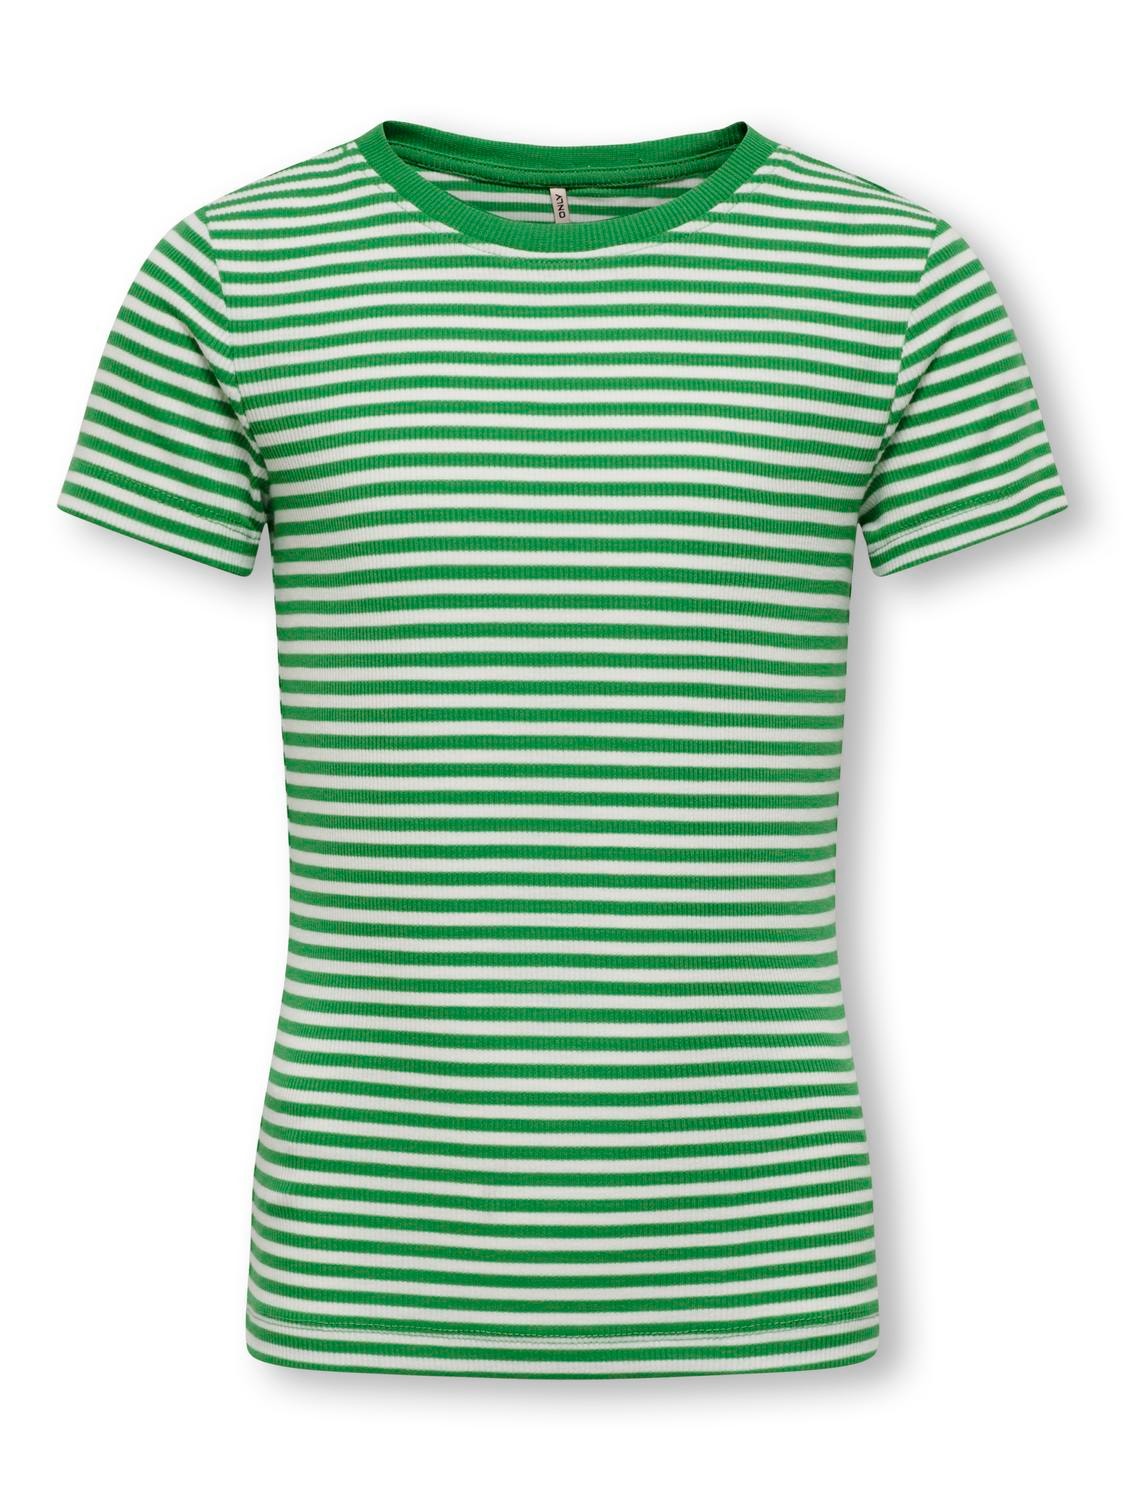 ONLY Striped T-shirt -Kelly Green - 15253157